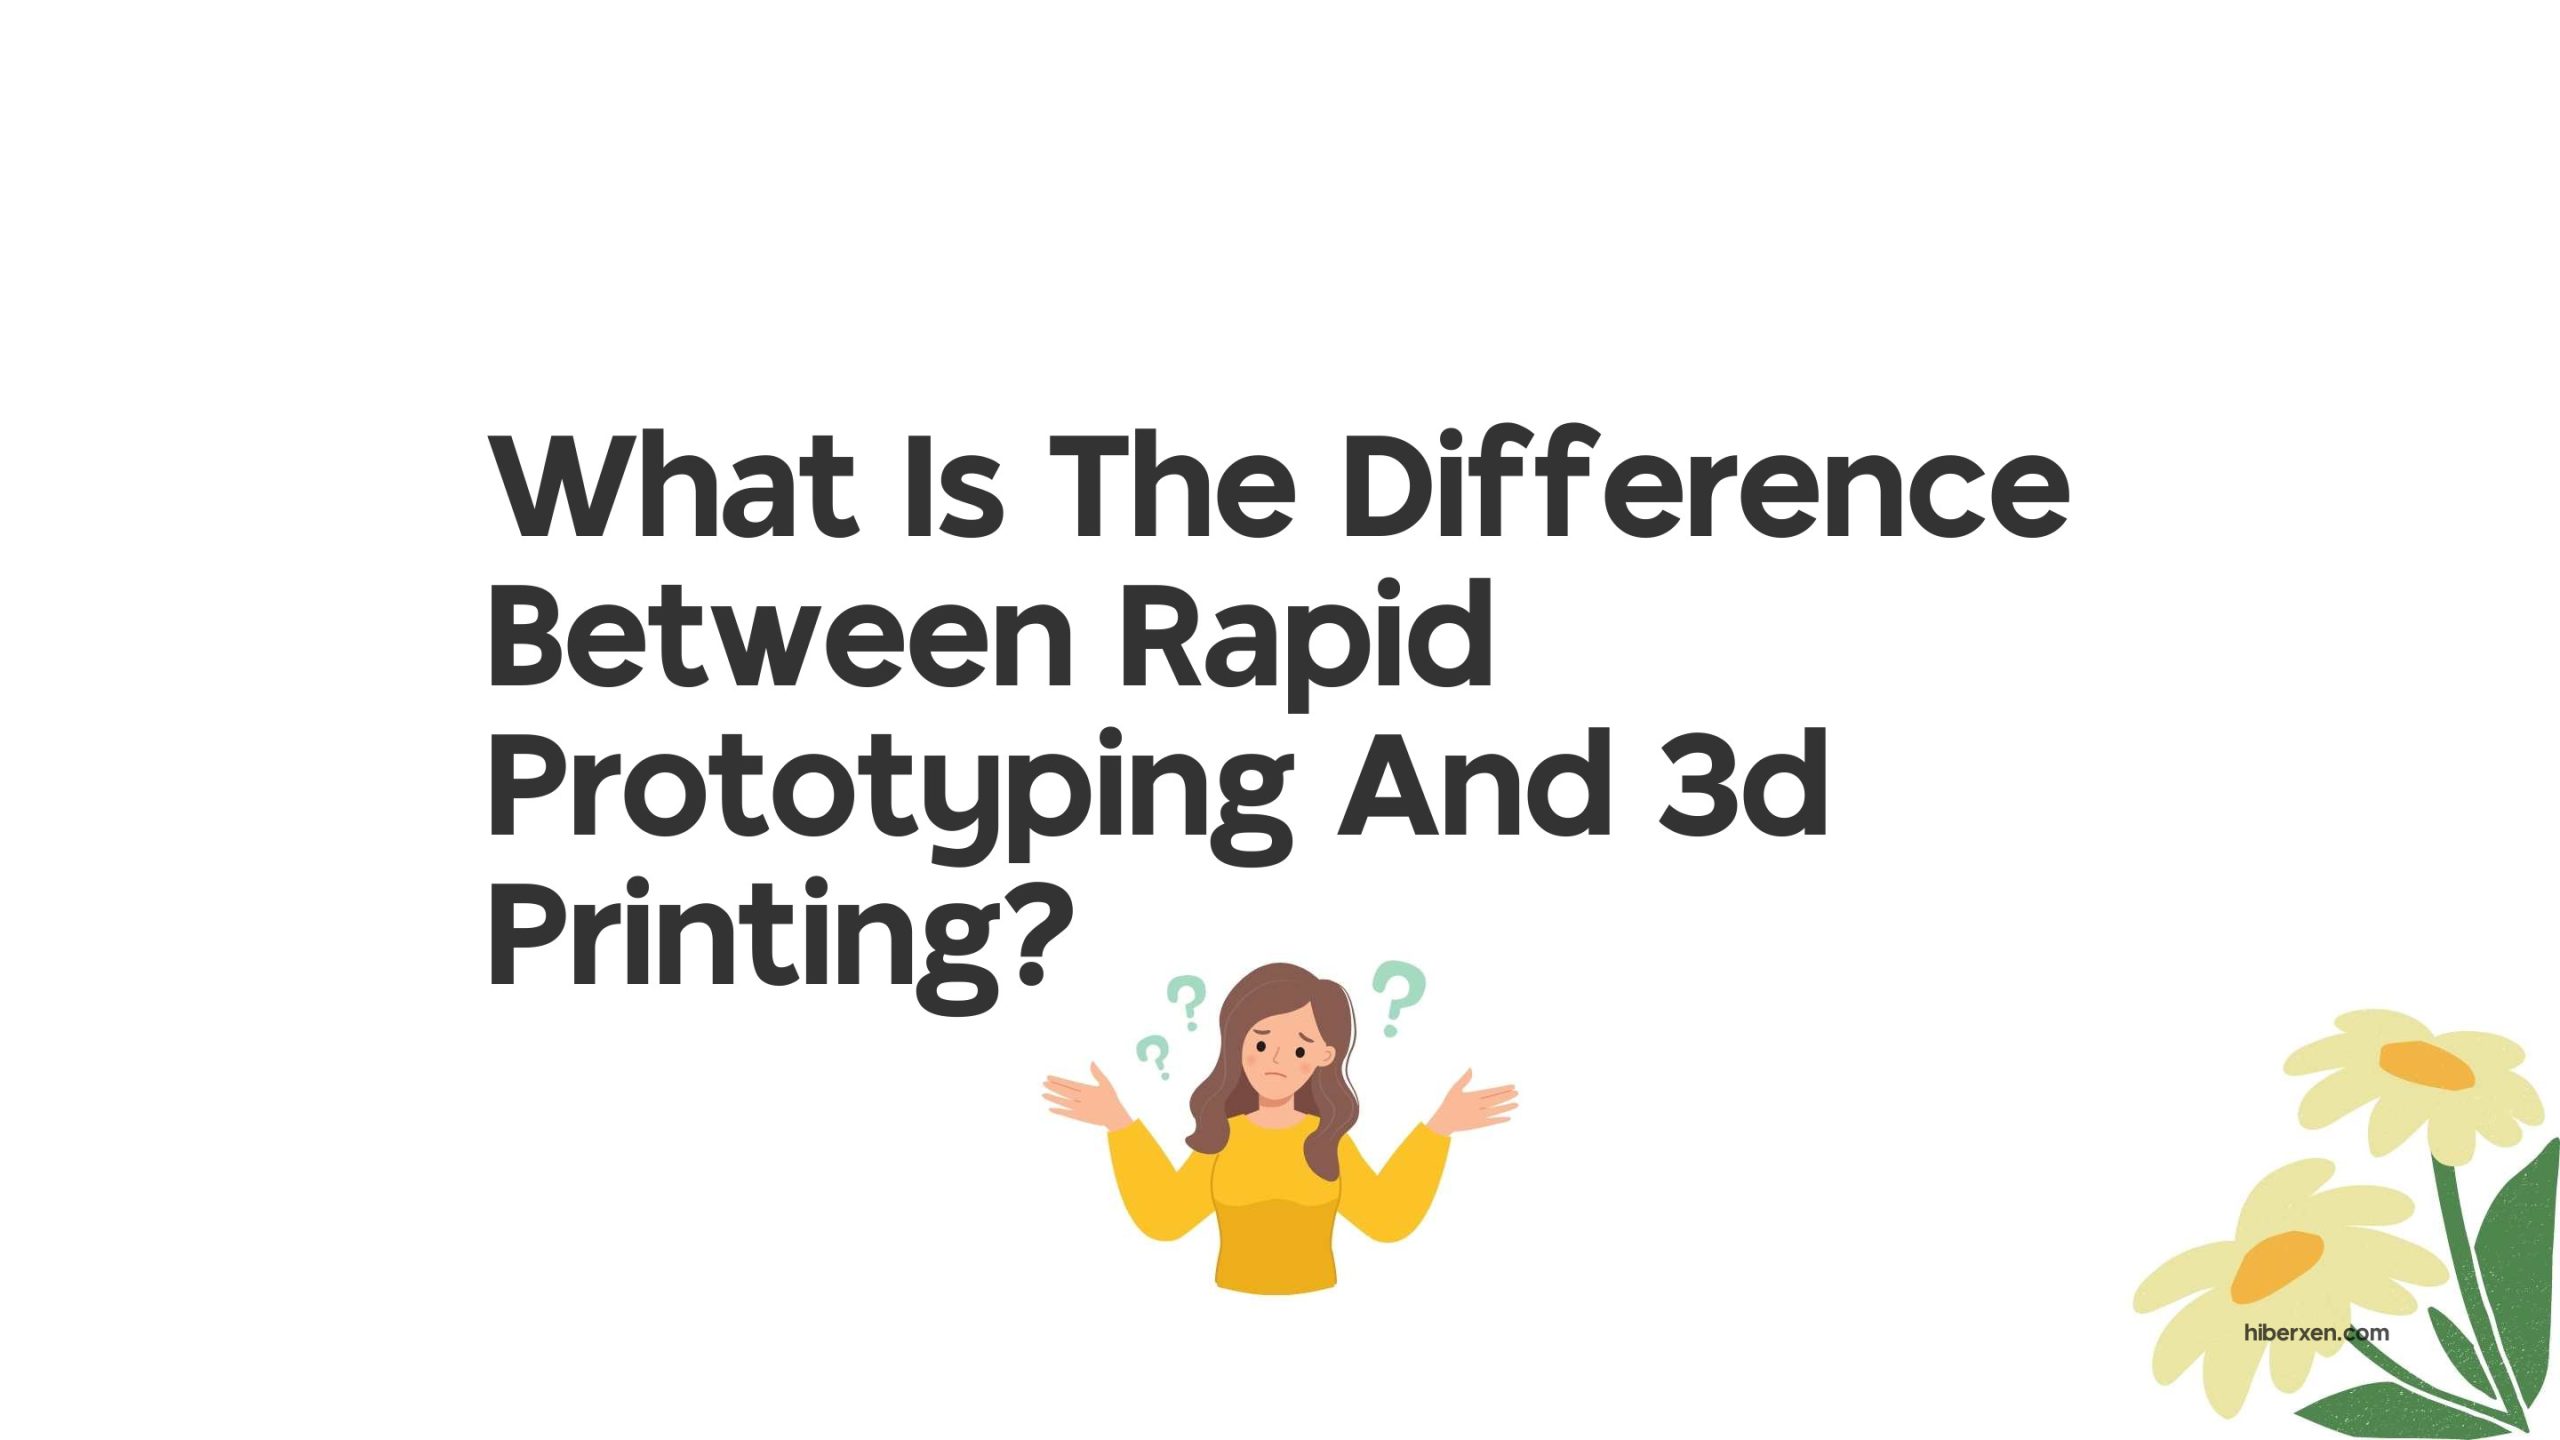 What Is The Difference Between Rapid Prototyping And 3d Printing?